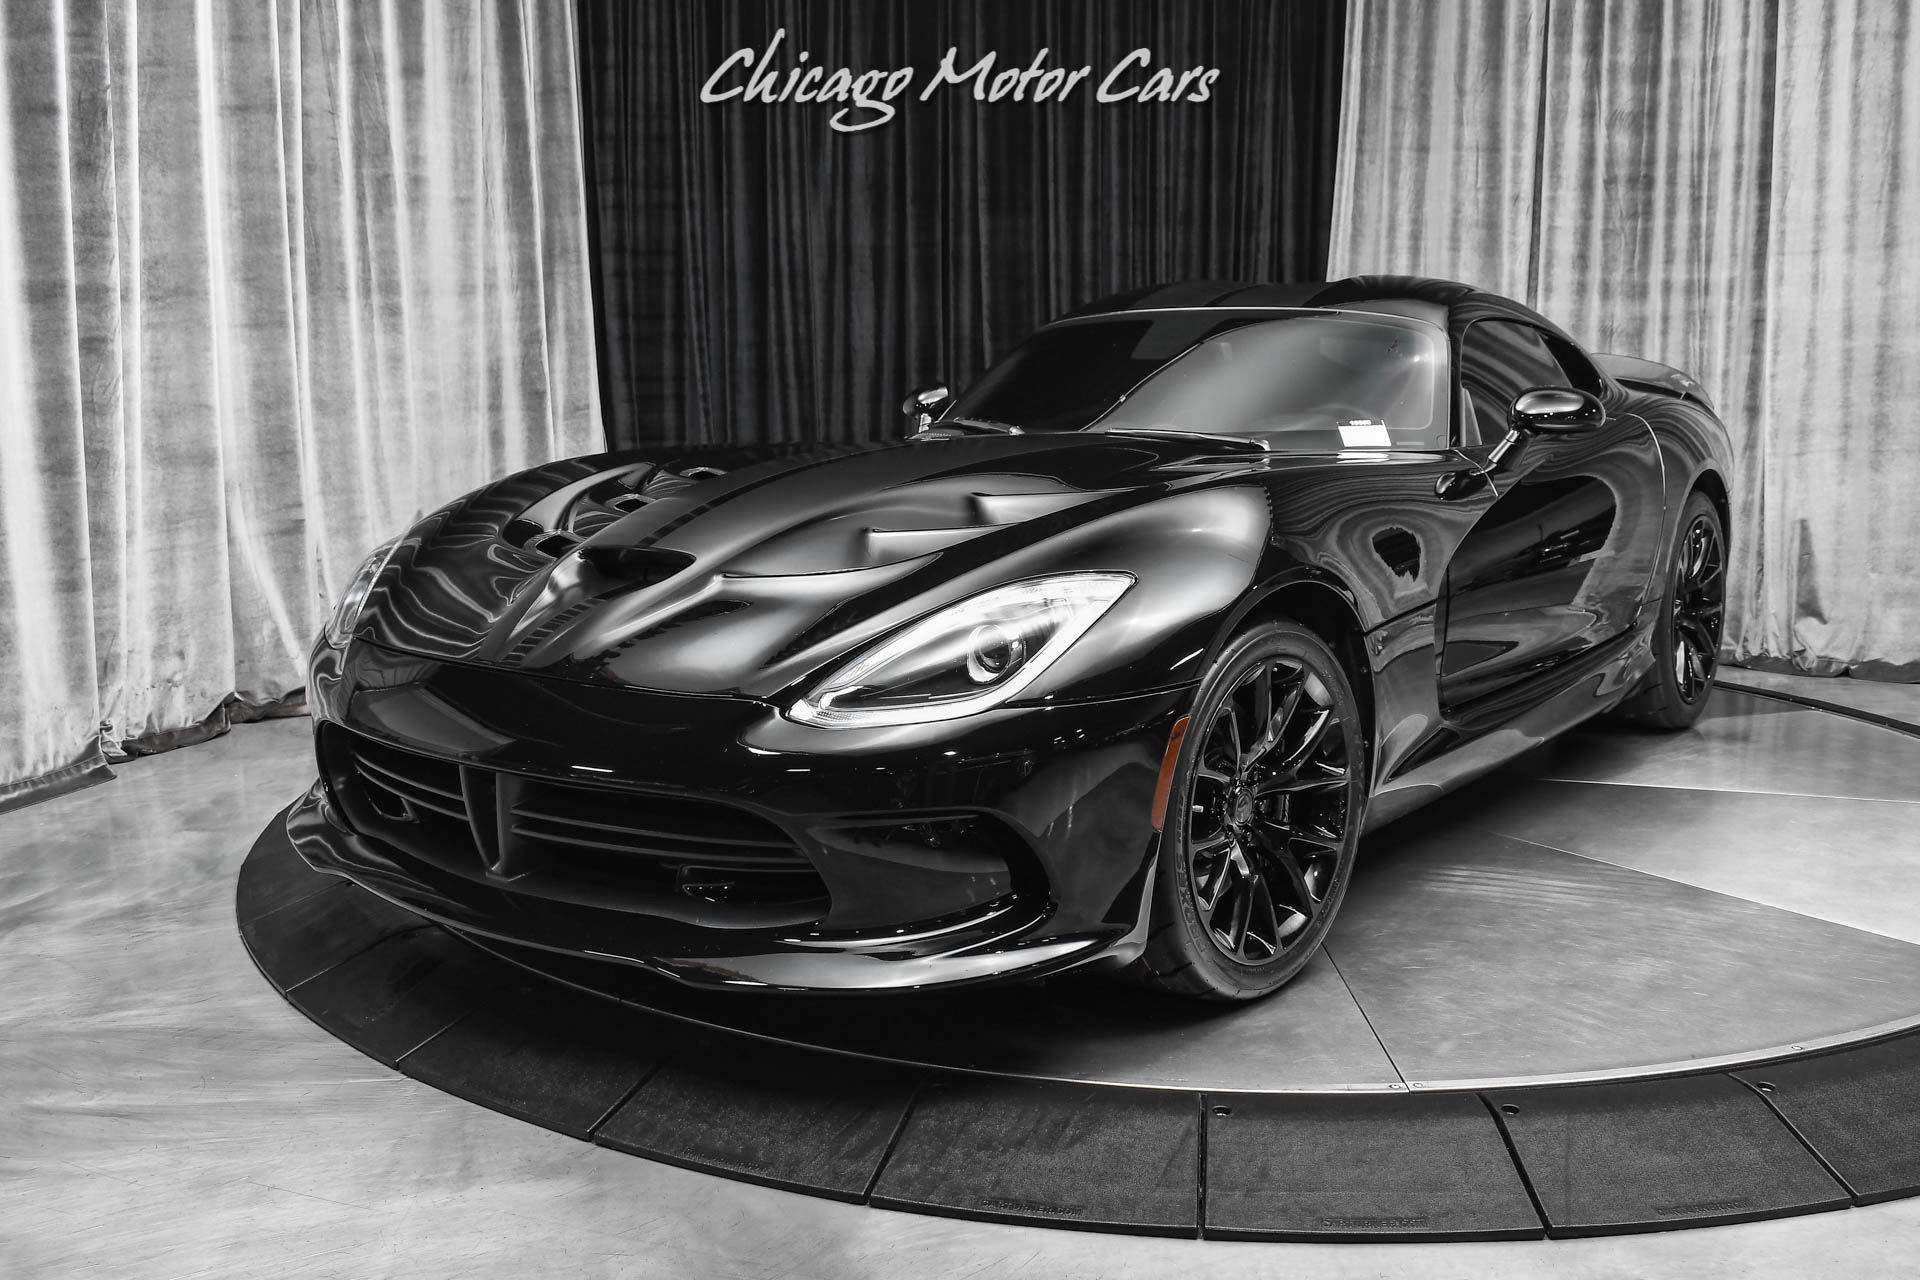 Used-2013-Dodge-Viper-ALL-BLACK-Carbon-Fiber-Leather-Bucket-Seats-CORSA-Exhaust-Only-17K-Miles